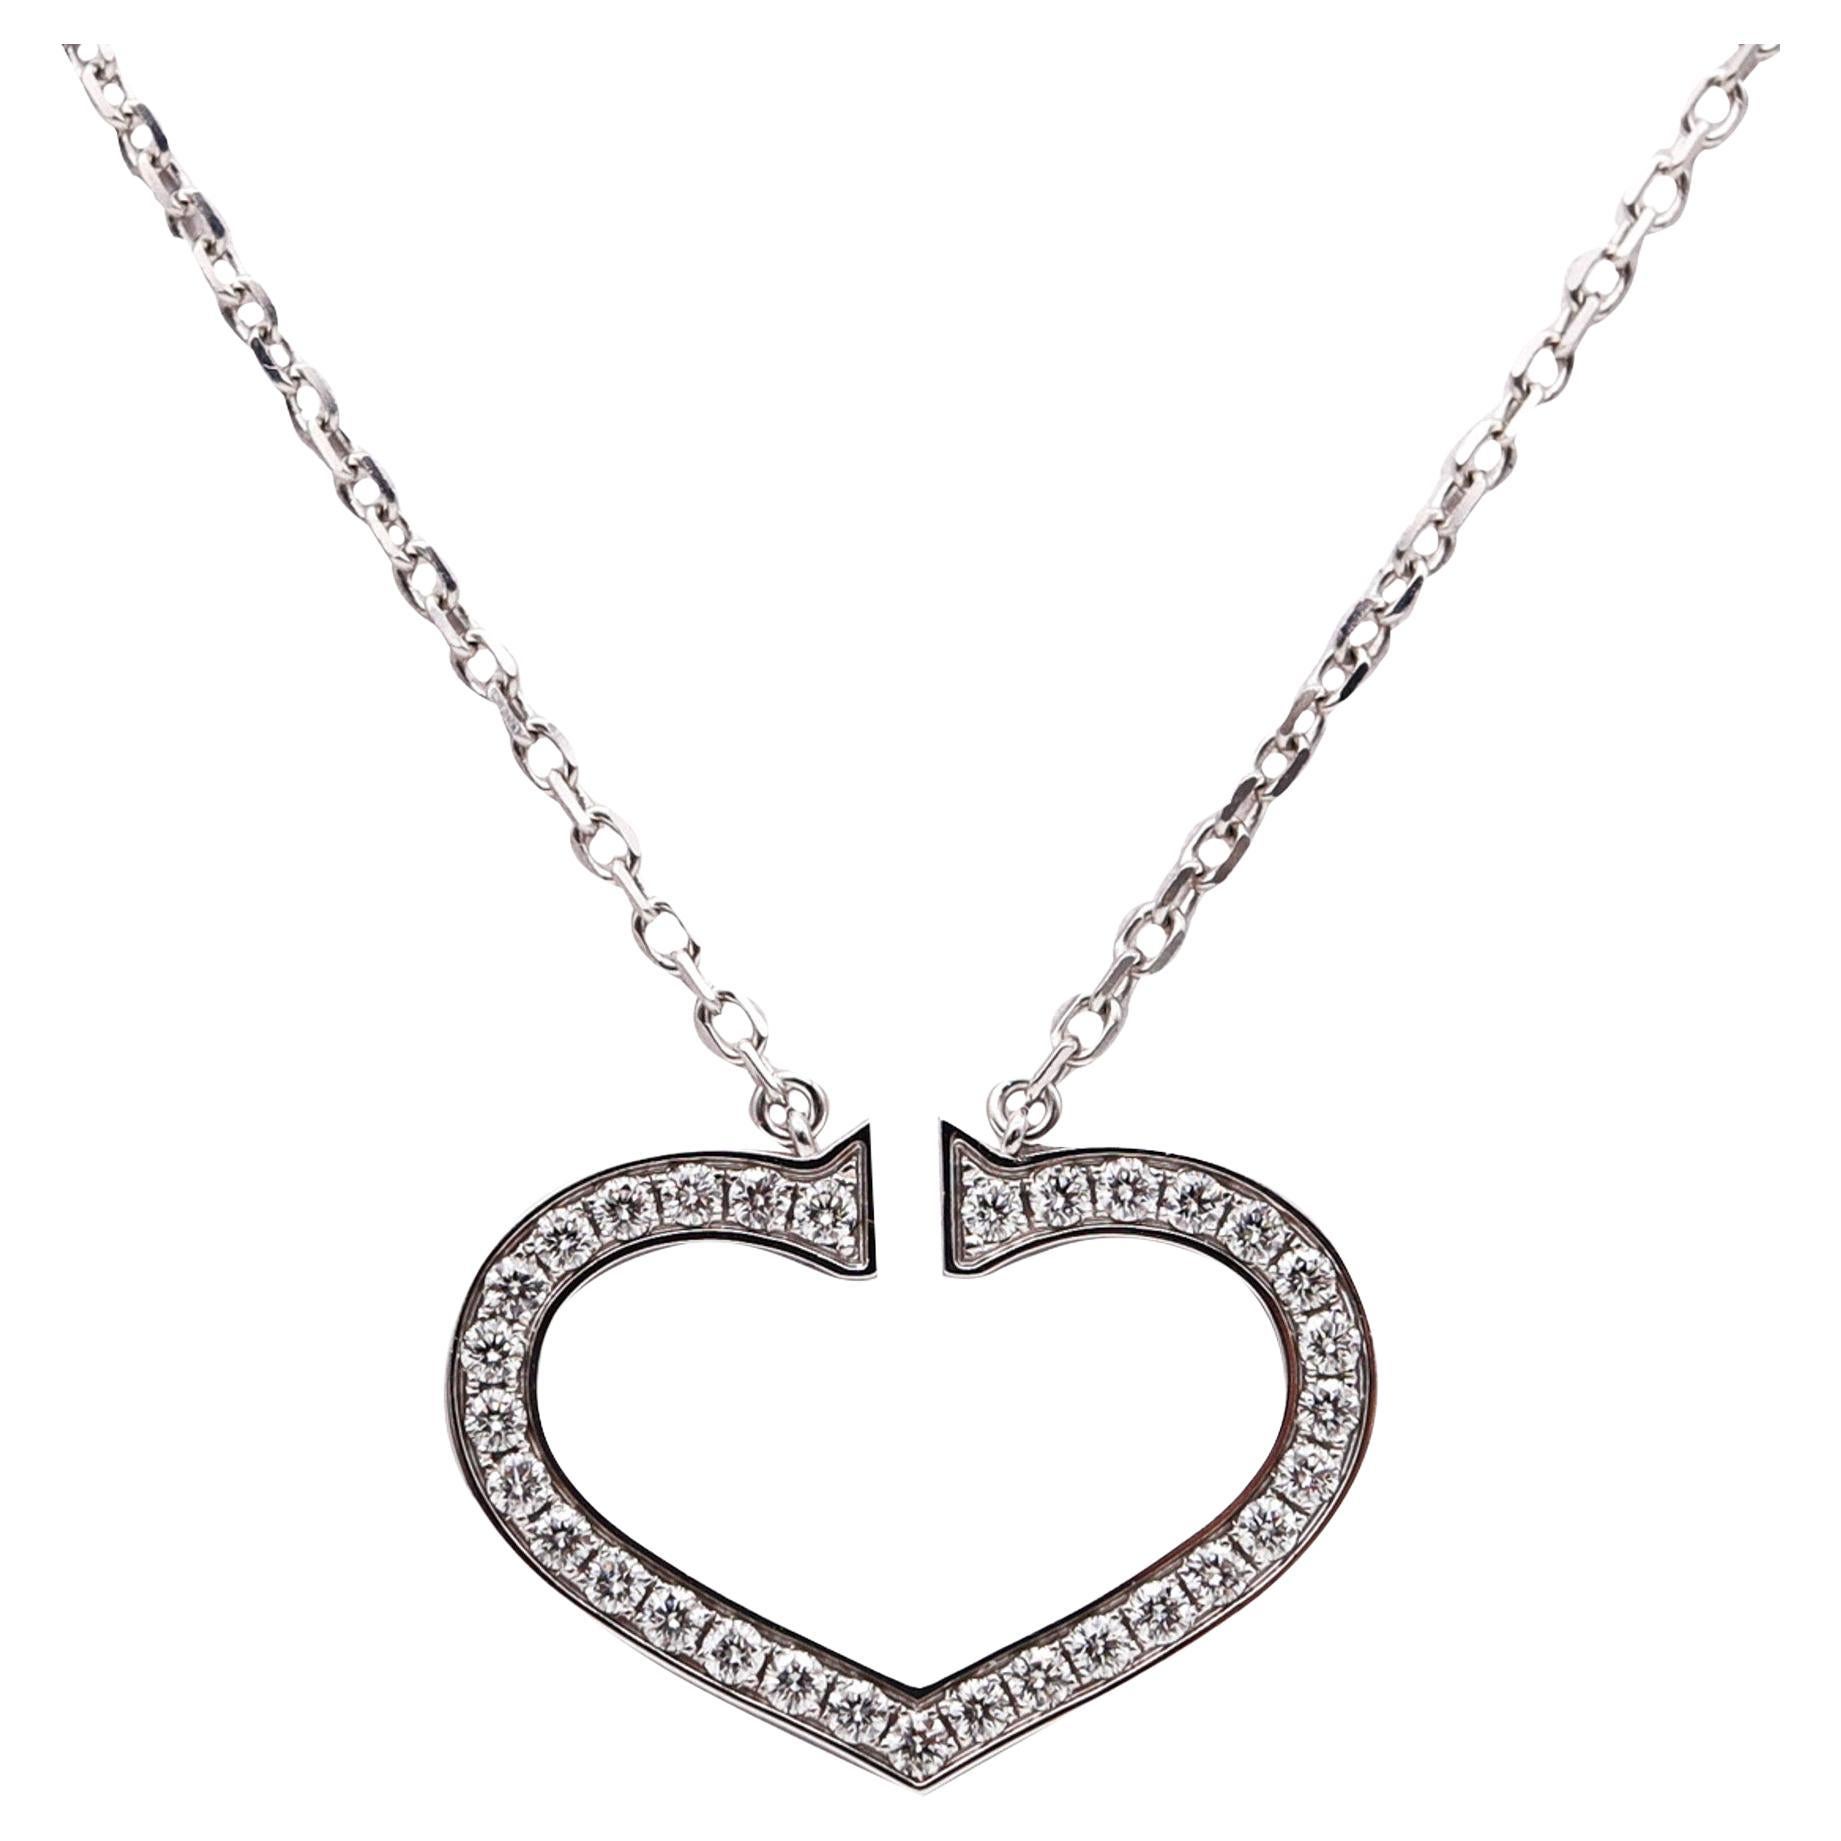 Cartier C Heart Necklace In 18Kt White Gold With 1.55 Ctw In VVS Diamonds